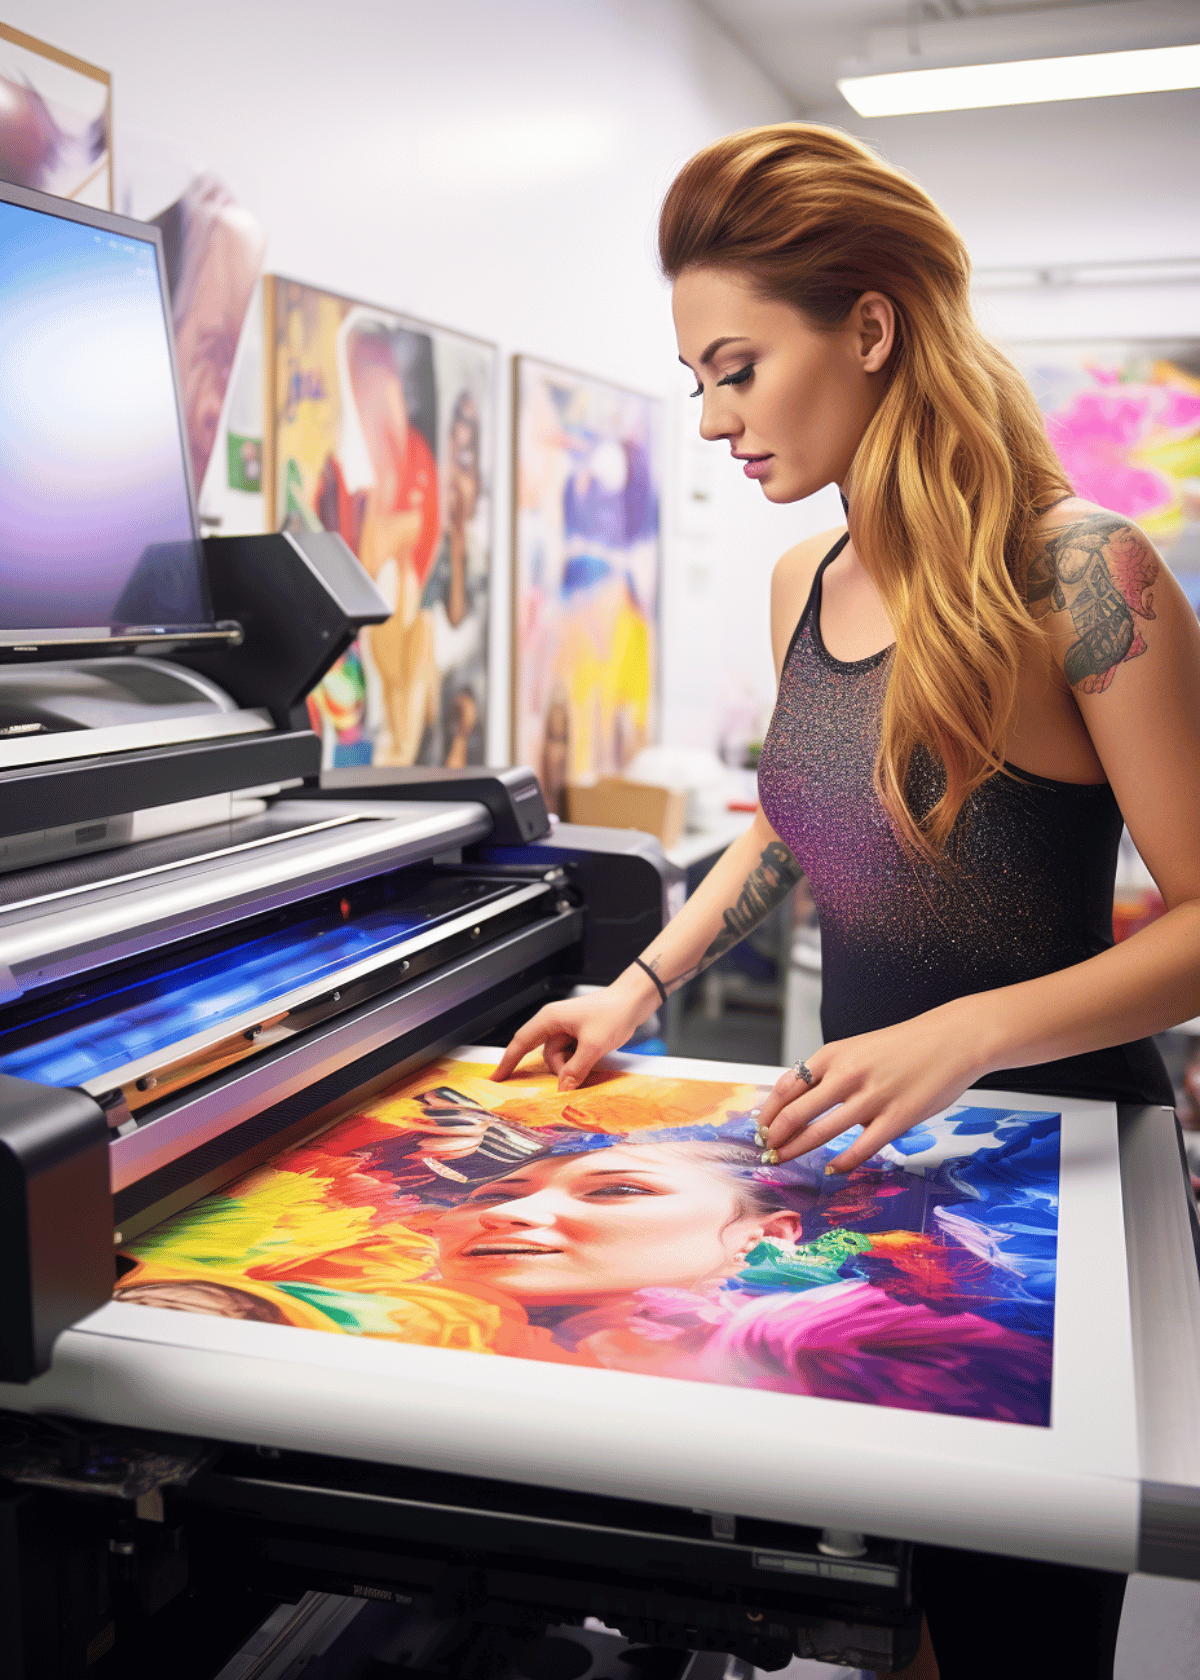 Bring Your Designs To Life With The Best Sublimation Printer! 🎨